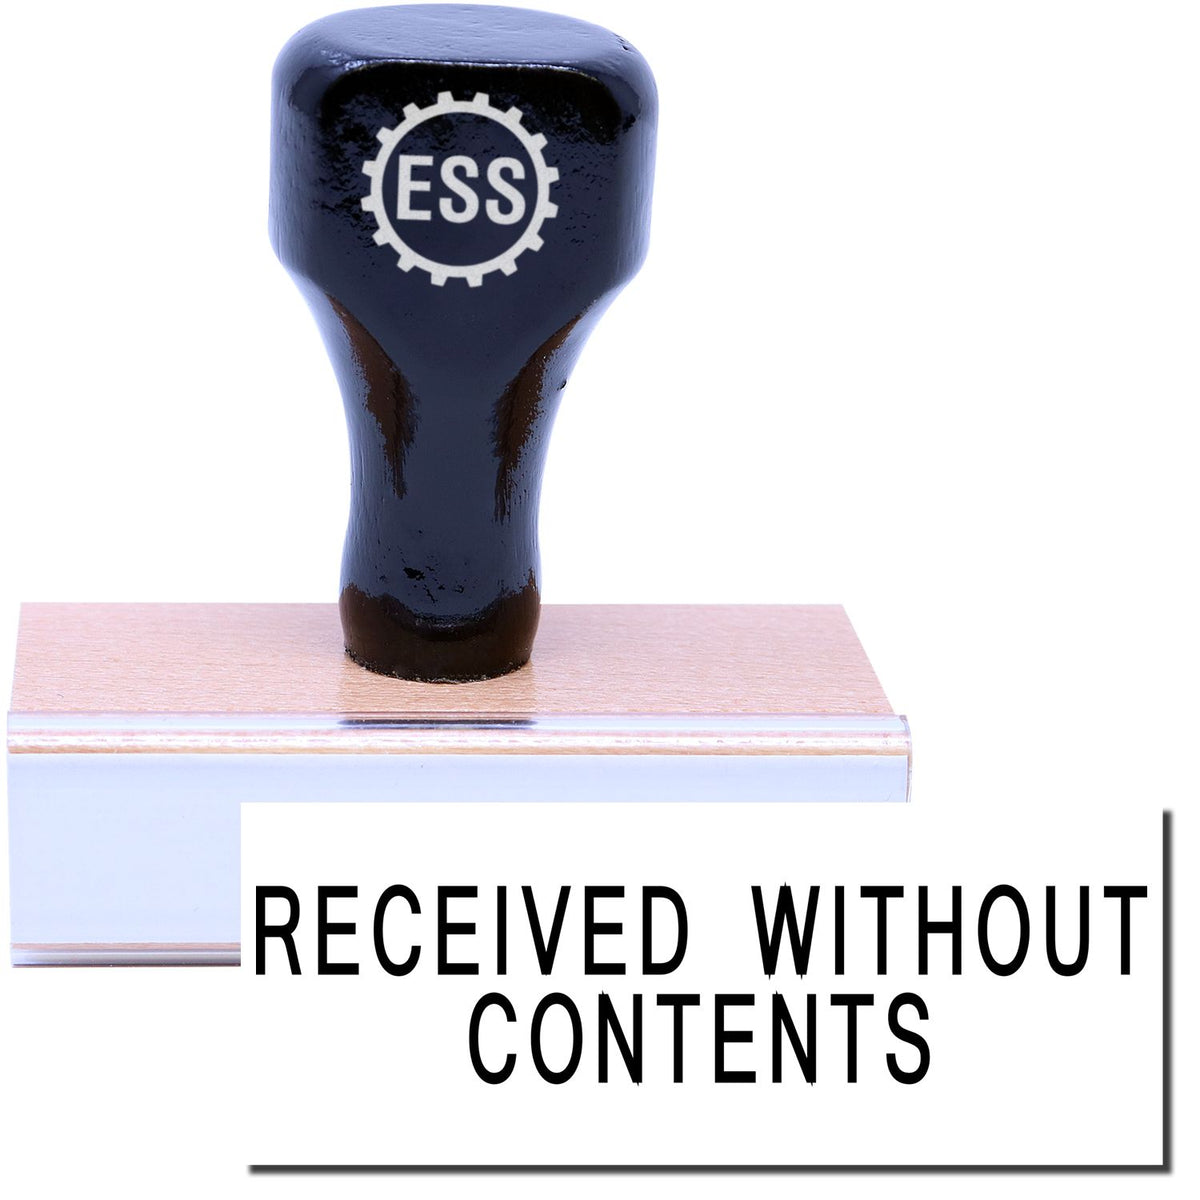 A stock office rubber stamp with a stamped image showing how the text &quot;RECEIVED WITHOUT CONTENTS&quot; is displayed after stamping.